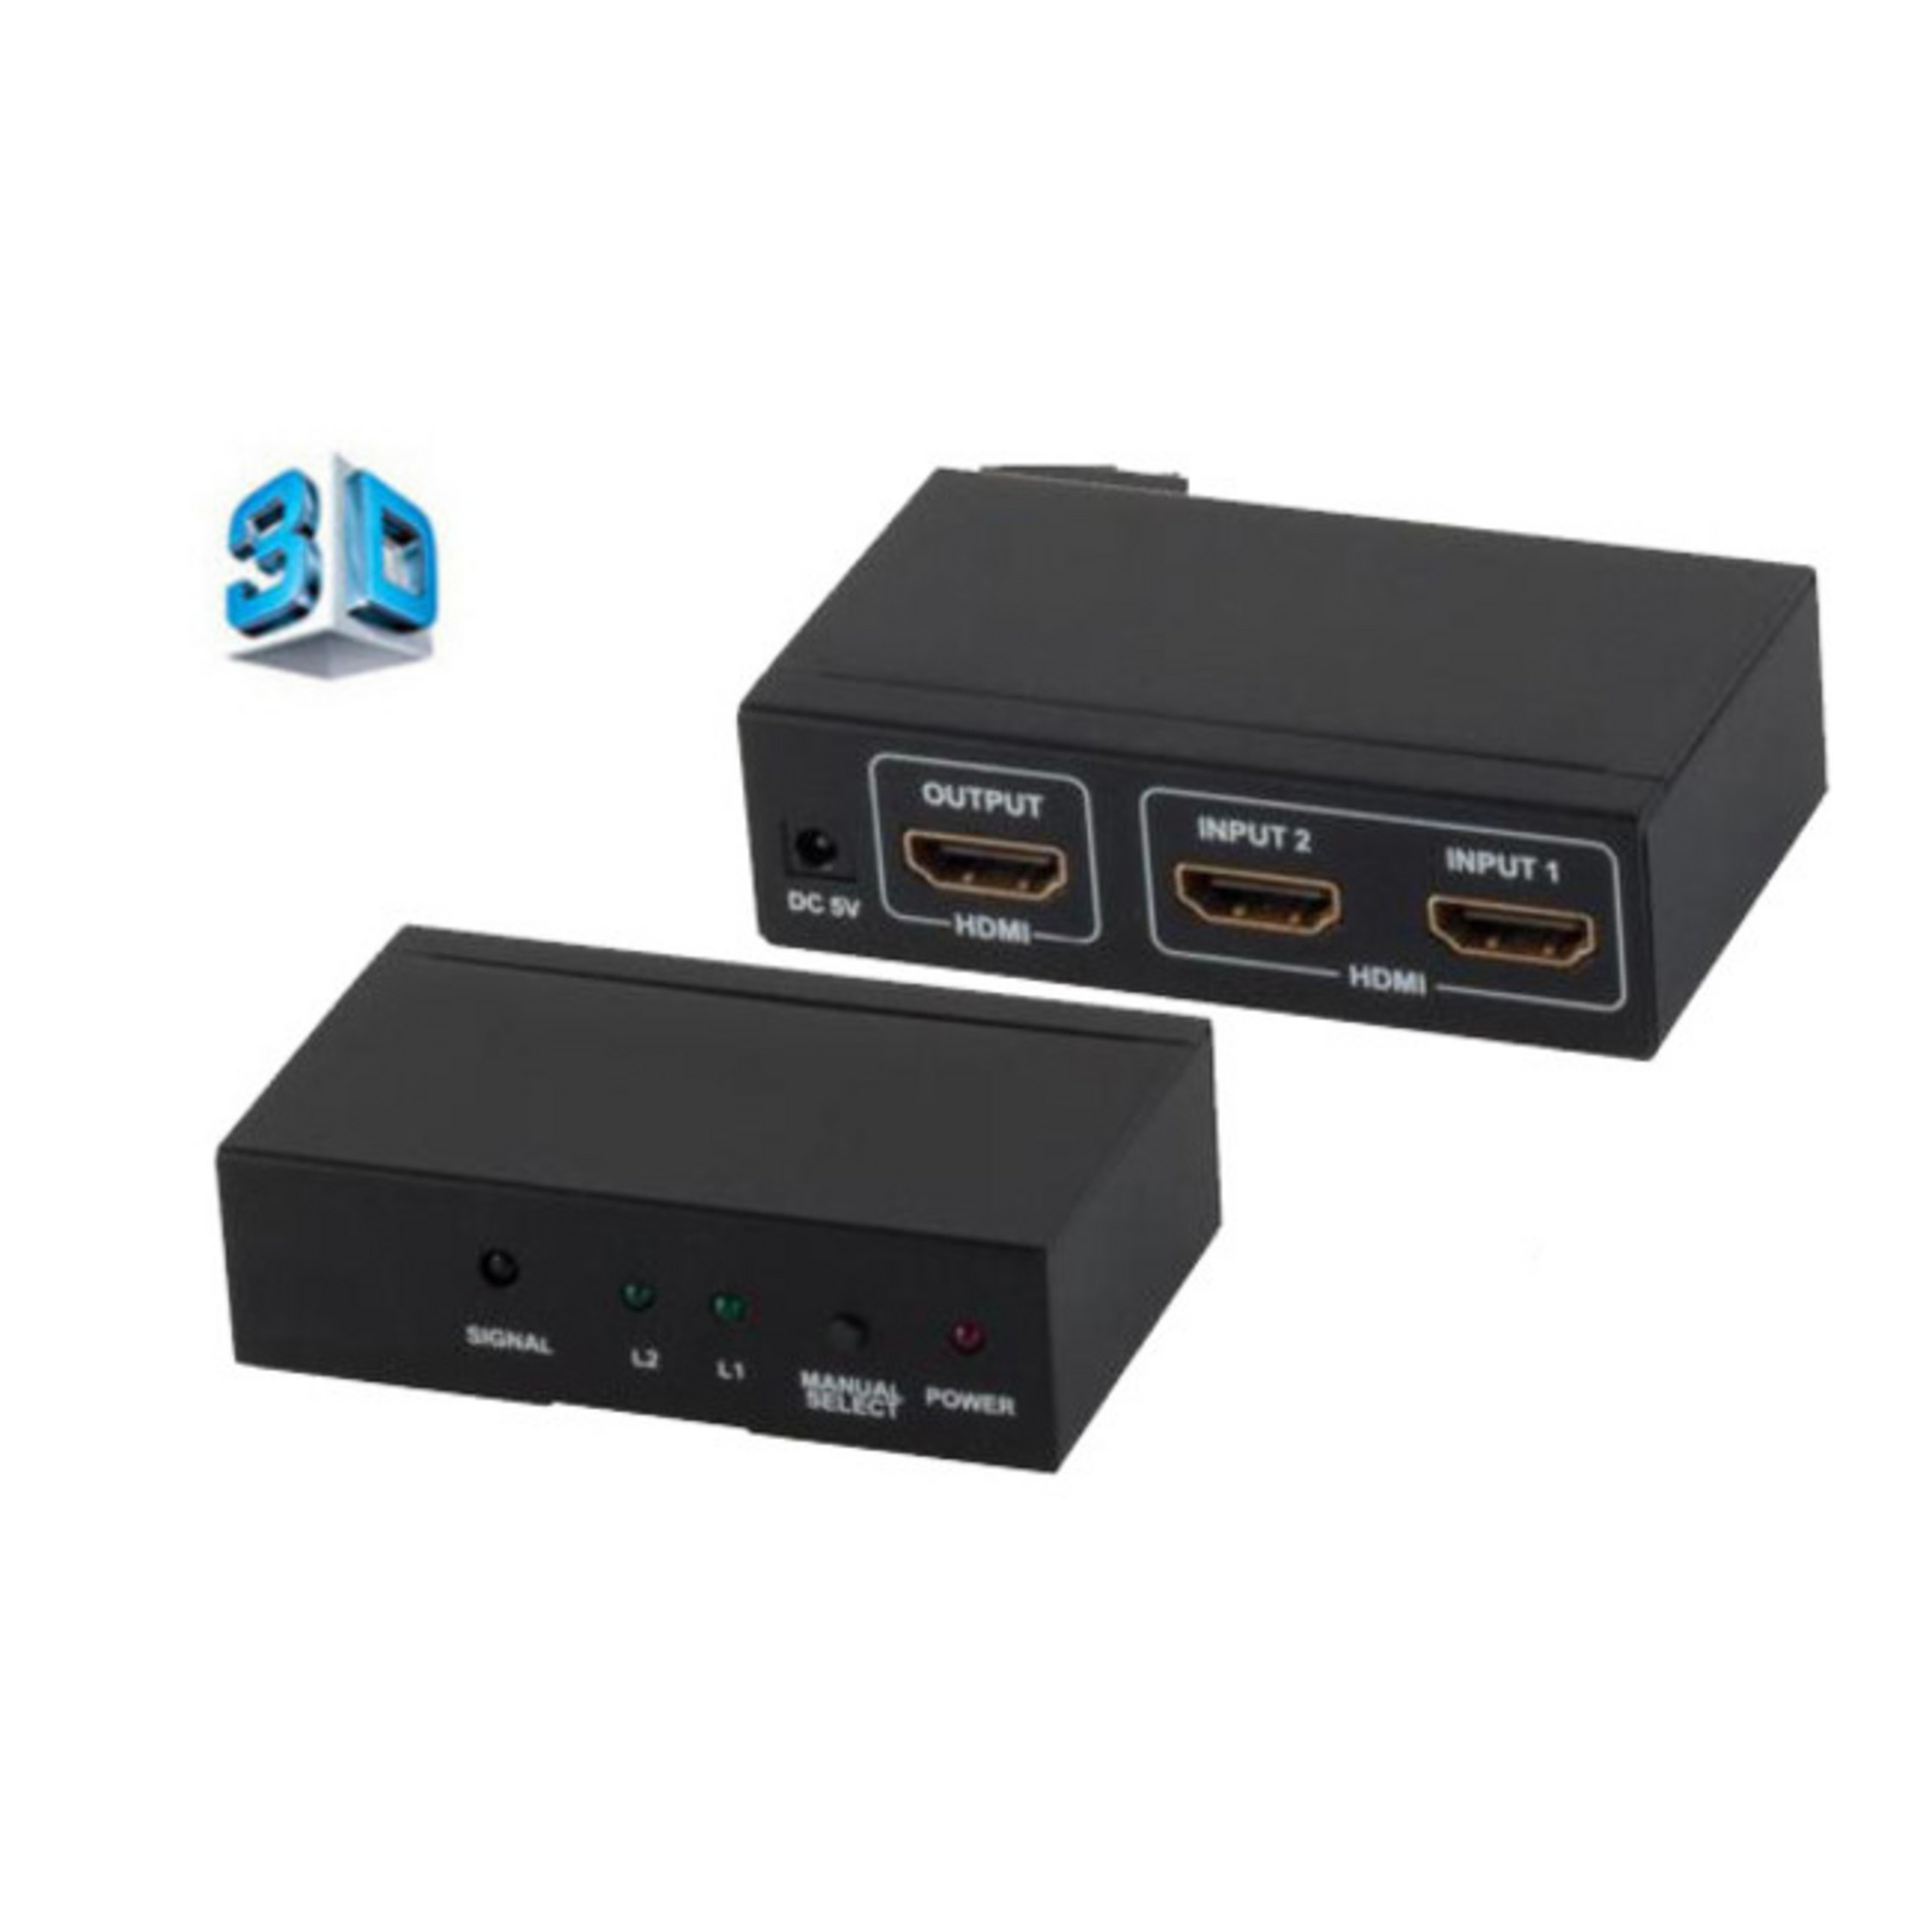 2x 1x HDMI Switch Switch, 4K2K, VER1.4, 3D, SHIVERPEAKS IN HDMI OUT,